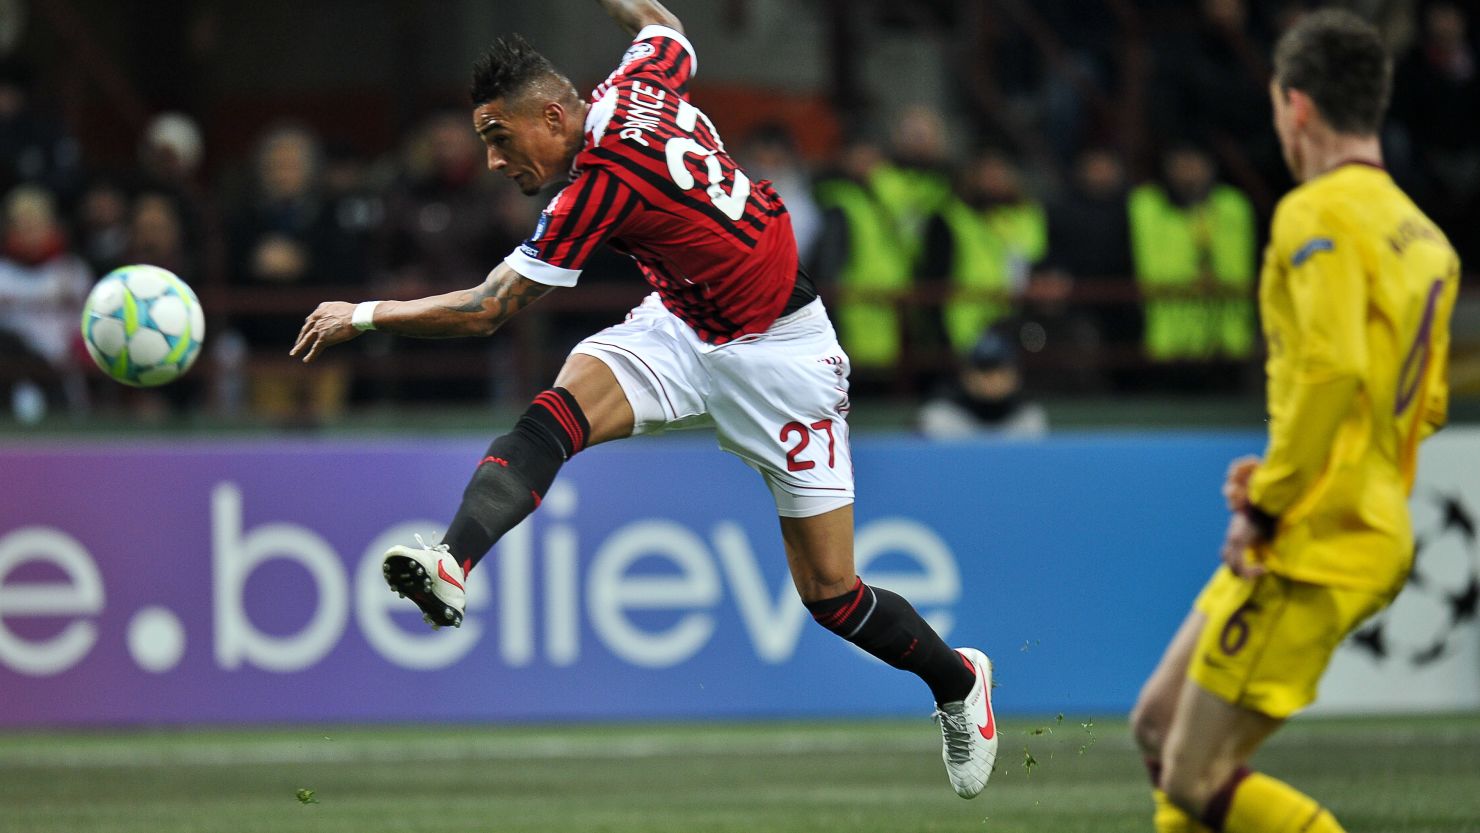 Kevin Prince Boateng opened the scoring for AC Milan against Arsenal with a sensational goal at the San Siro